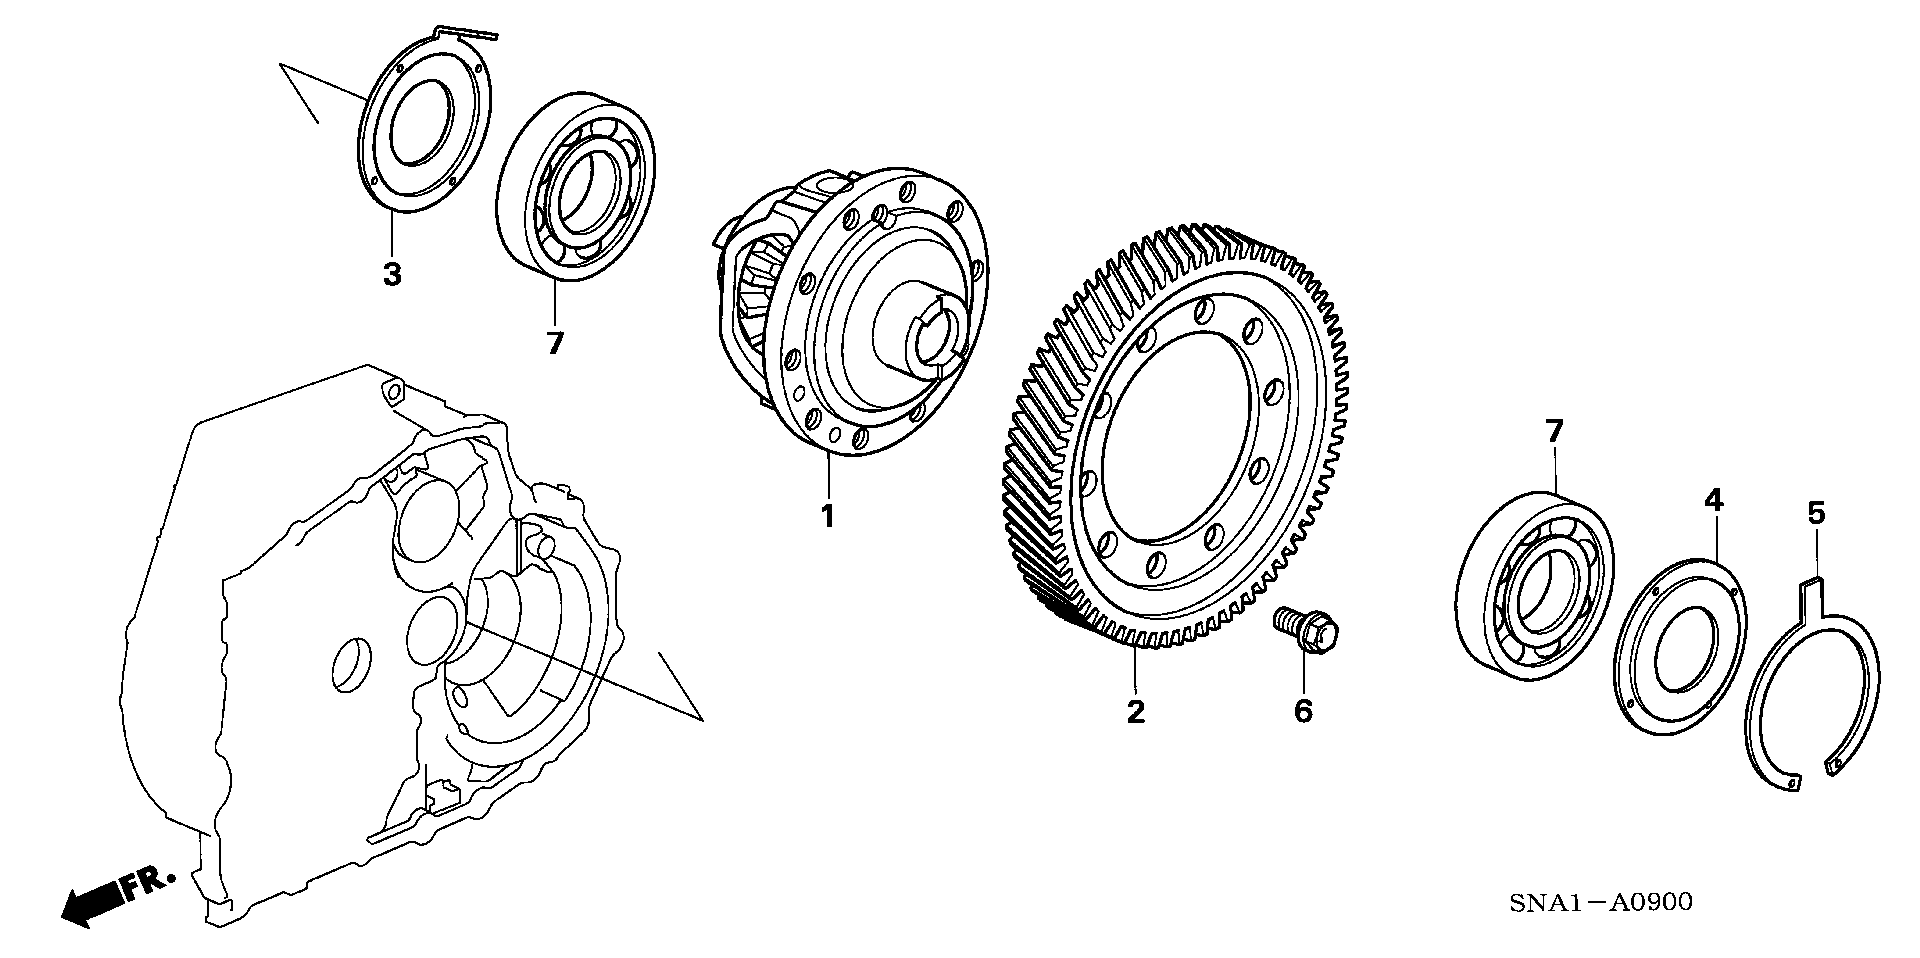 DIFFERENTIAL(1.8L)